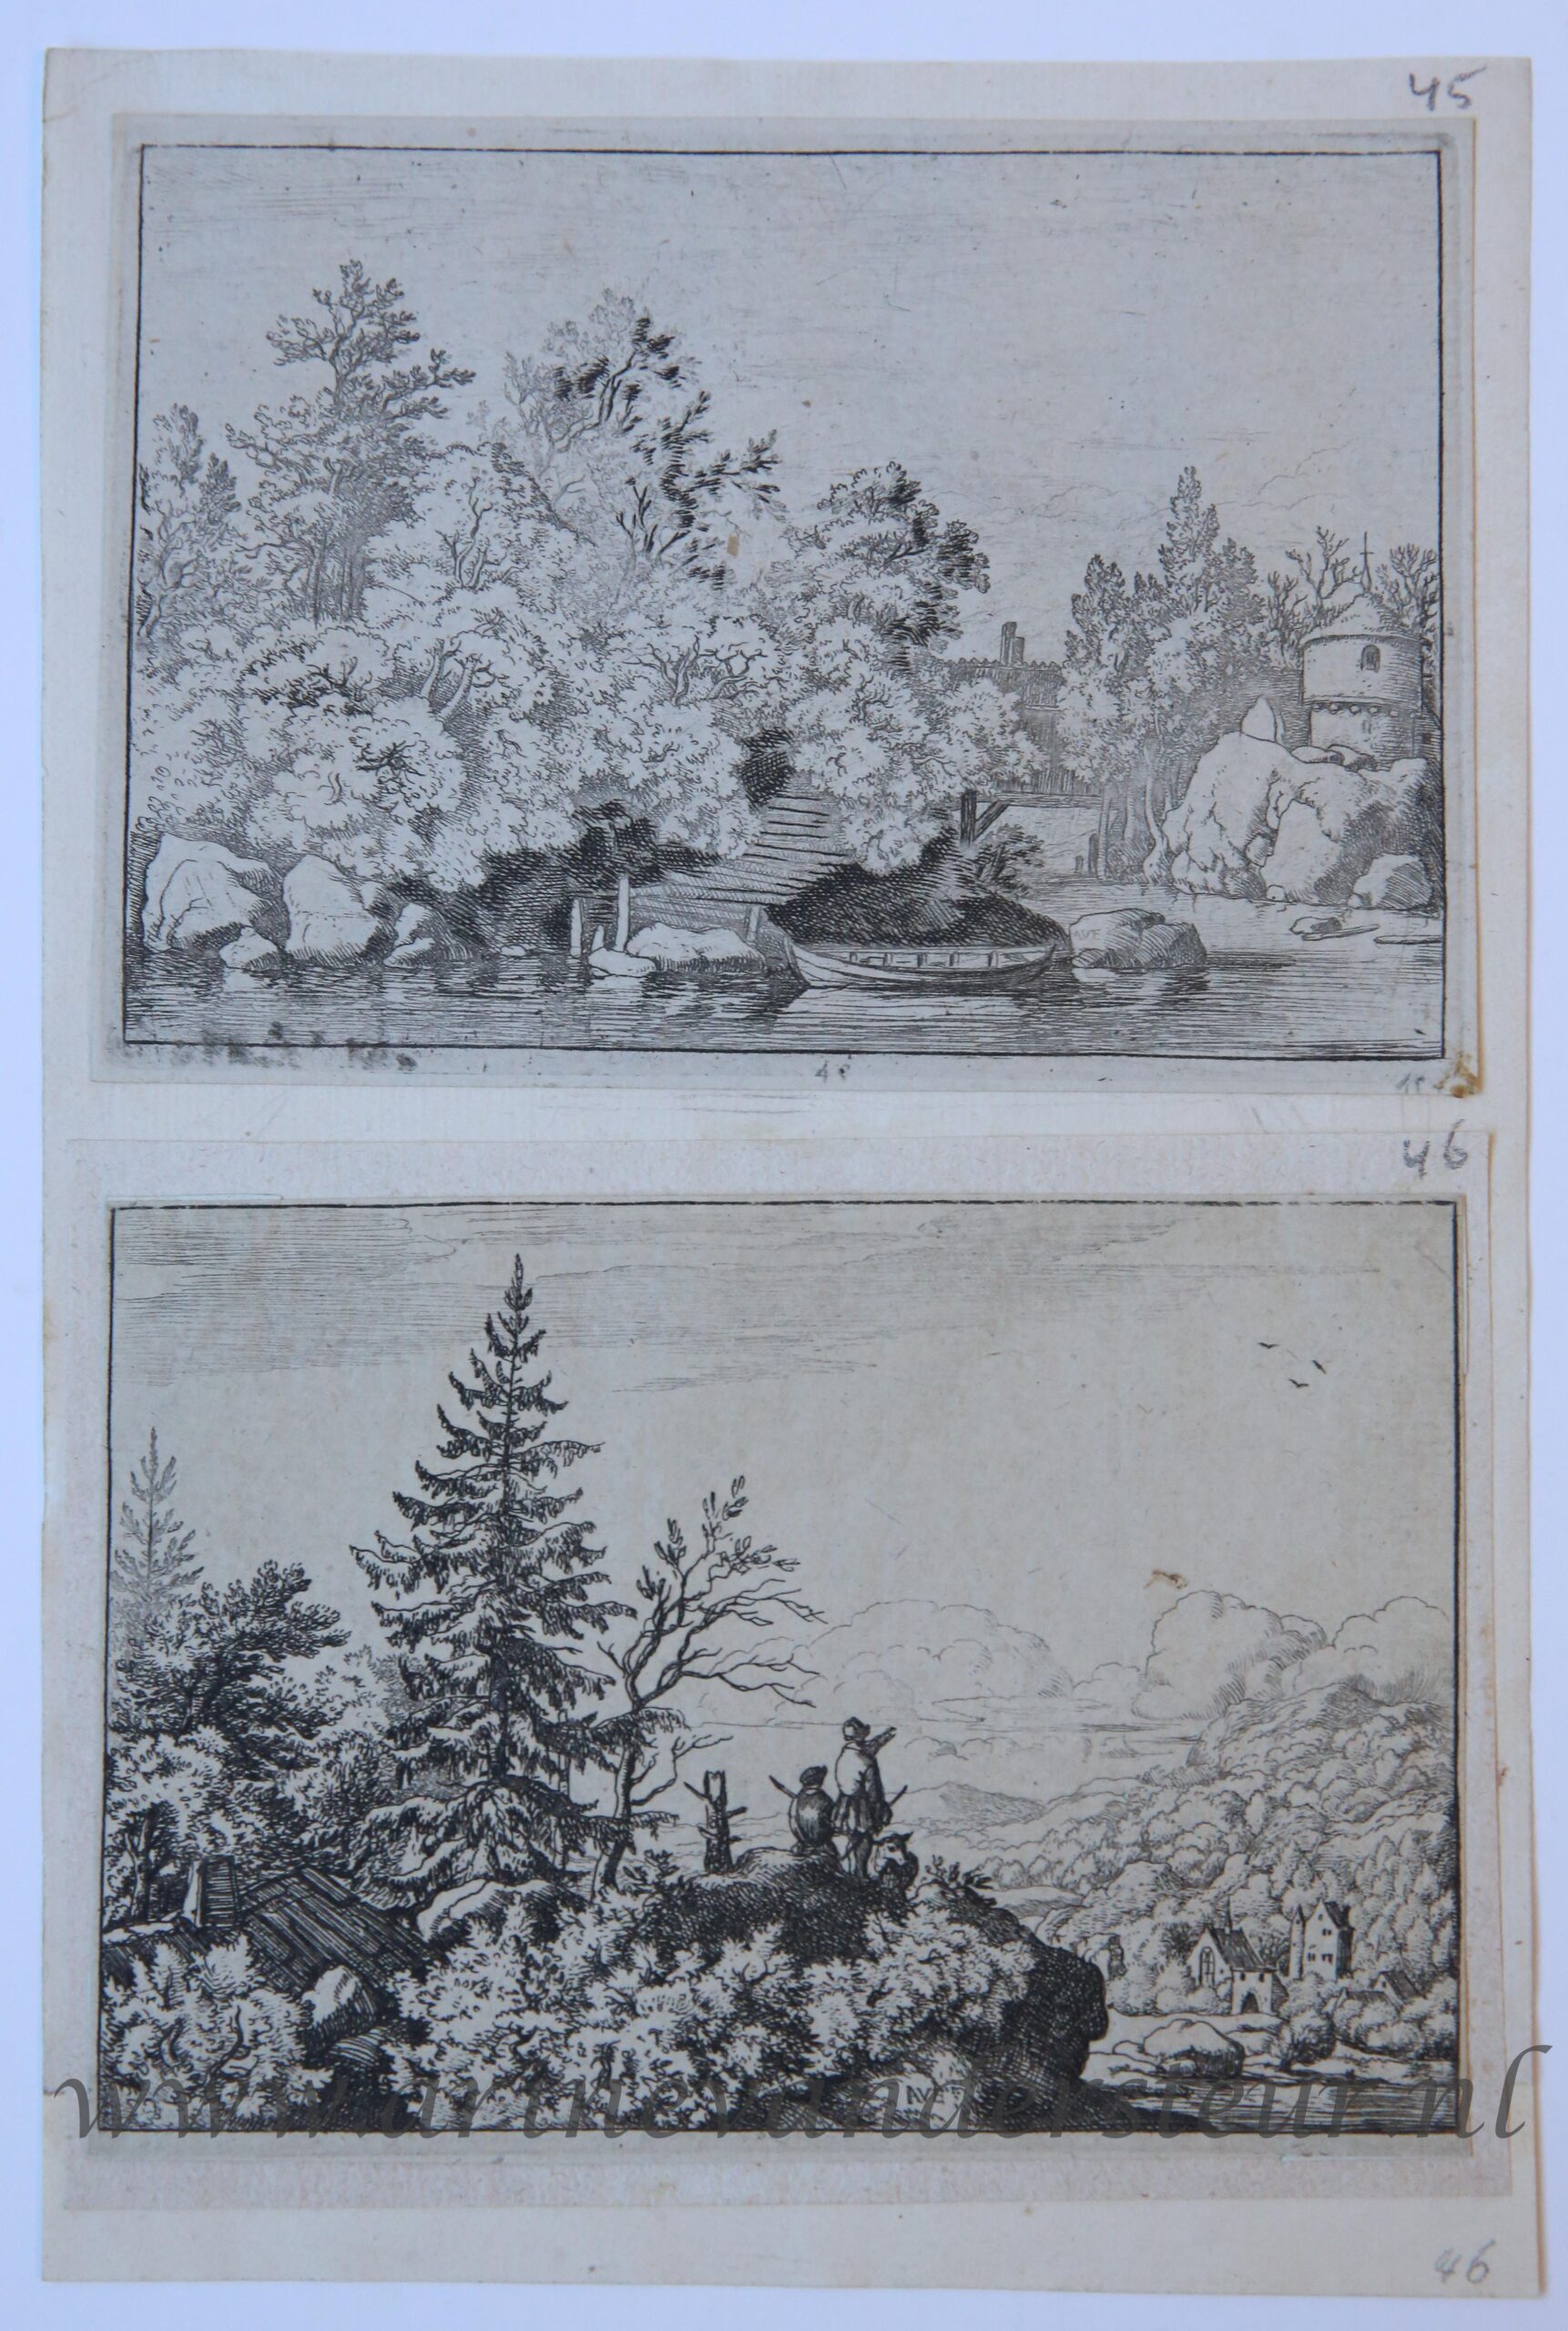 [Antique prints, etching] The Cudgel Dam and the Covered bridge; two men on the hill, published 1631-1657.